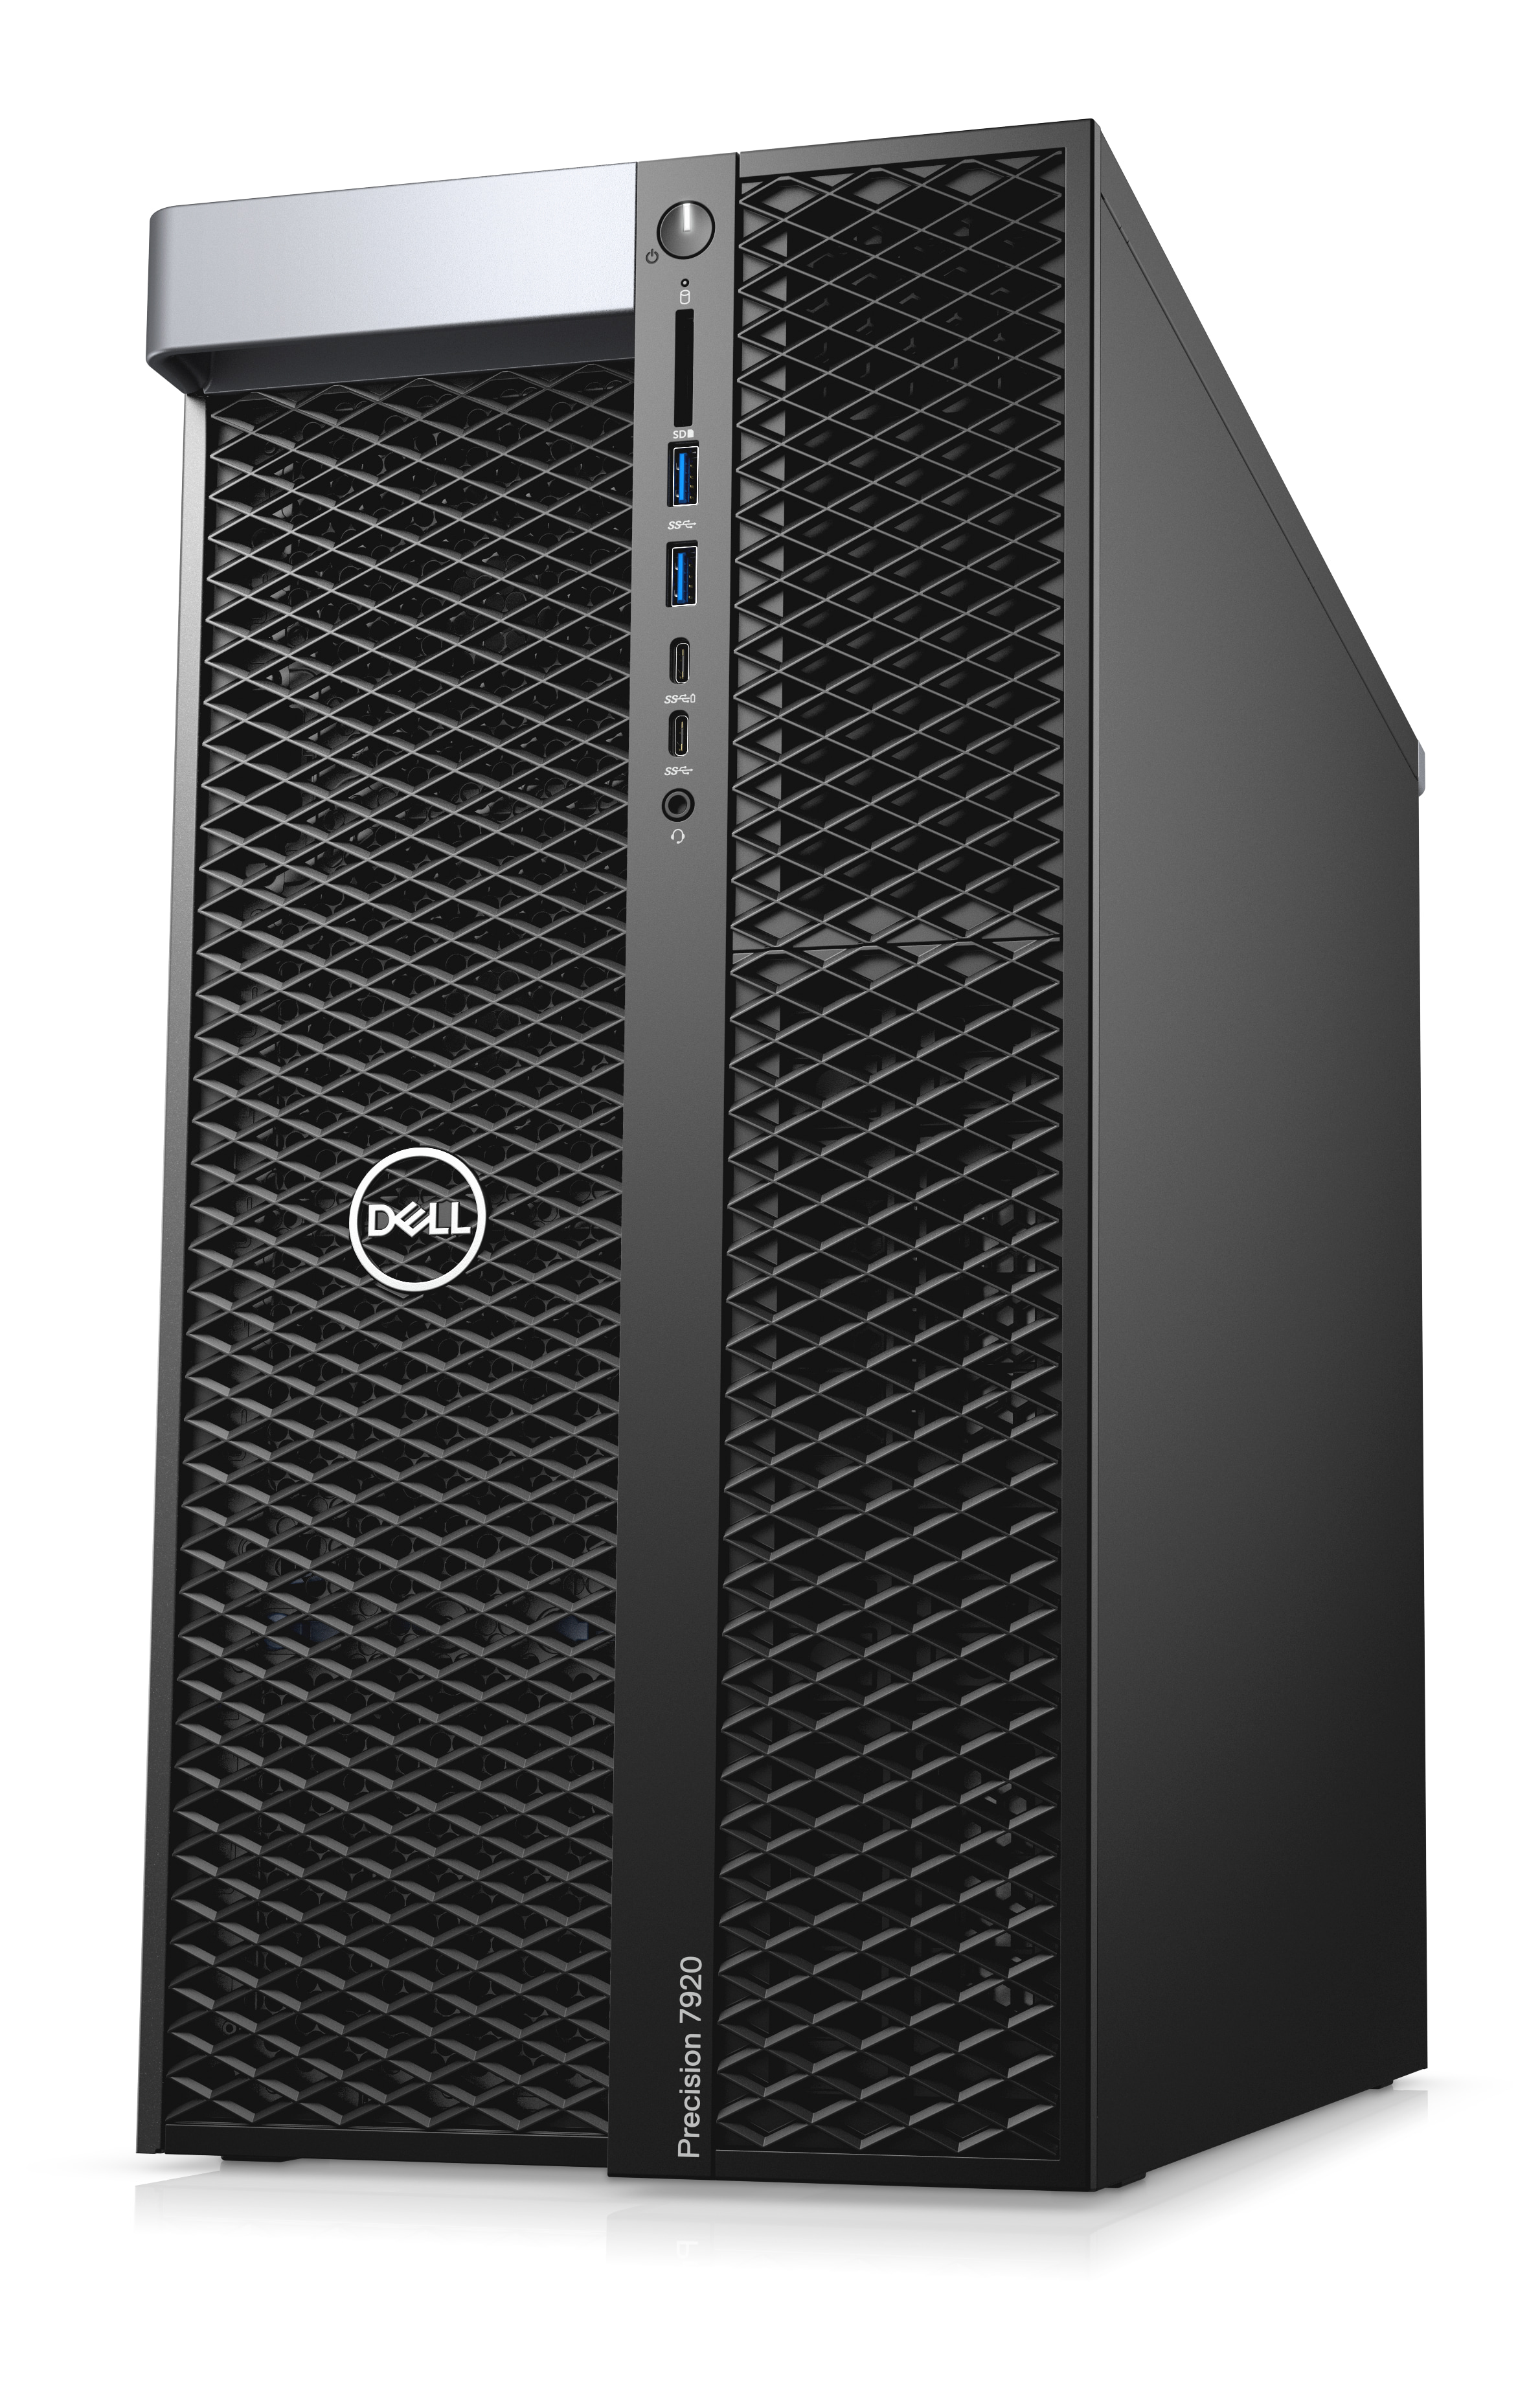 Precision 7920 Workstation Desktop Tower with Xeon Processor